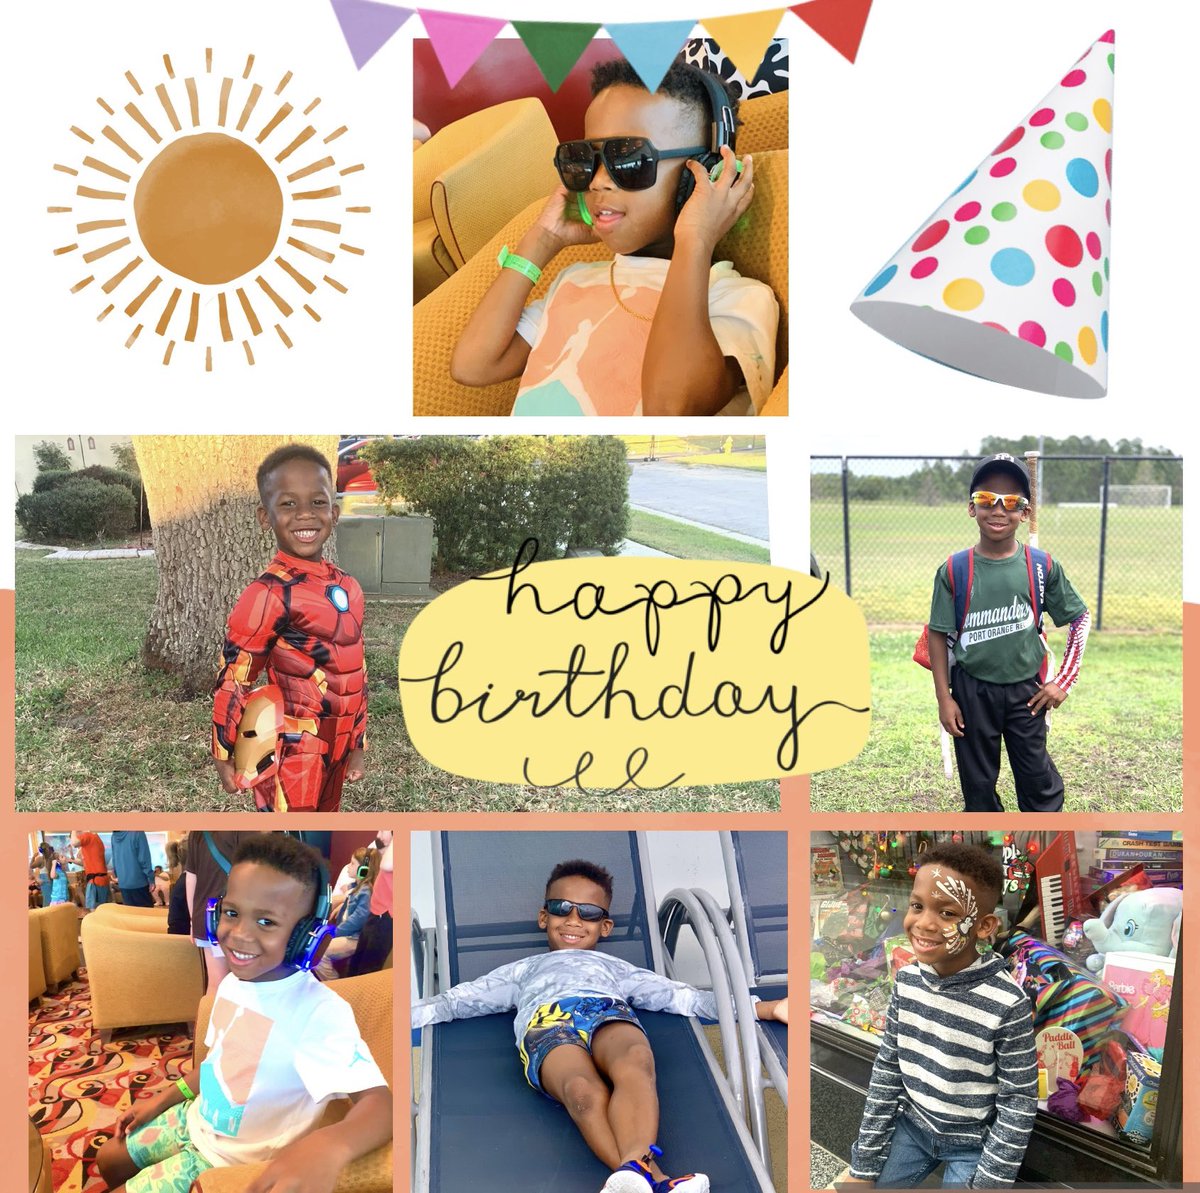 To the 𝗇𝖾𝗐𝖾𝗌𝗍 & 𝘤𝘰𝘰𝘭𝘦𝘴𝘵 7️⃣ year old we know, #HAPPYBIRTHDAY!!! #TristanJames you truly are the sunlight of our lives. To know you is to love you, and to be loved by you is a gift from above. Thank you, God, for our sonshine ☀️😎😍